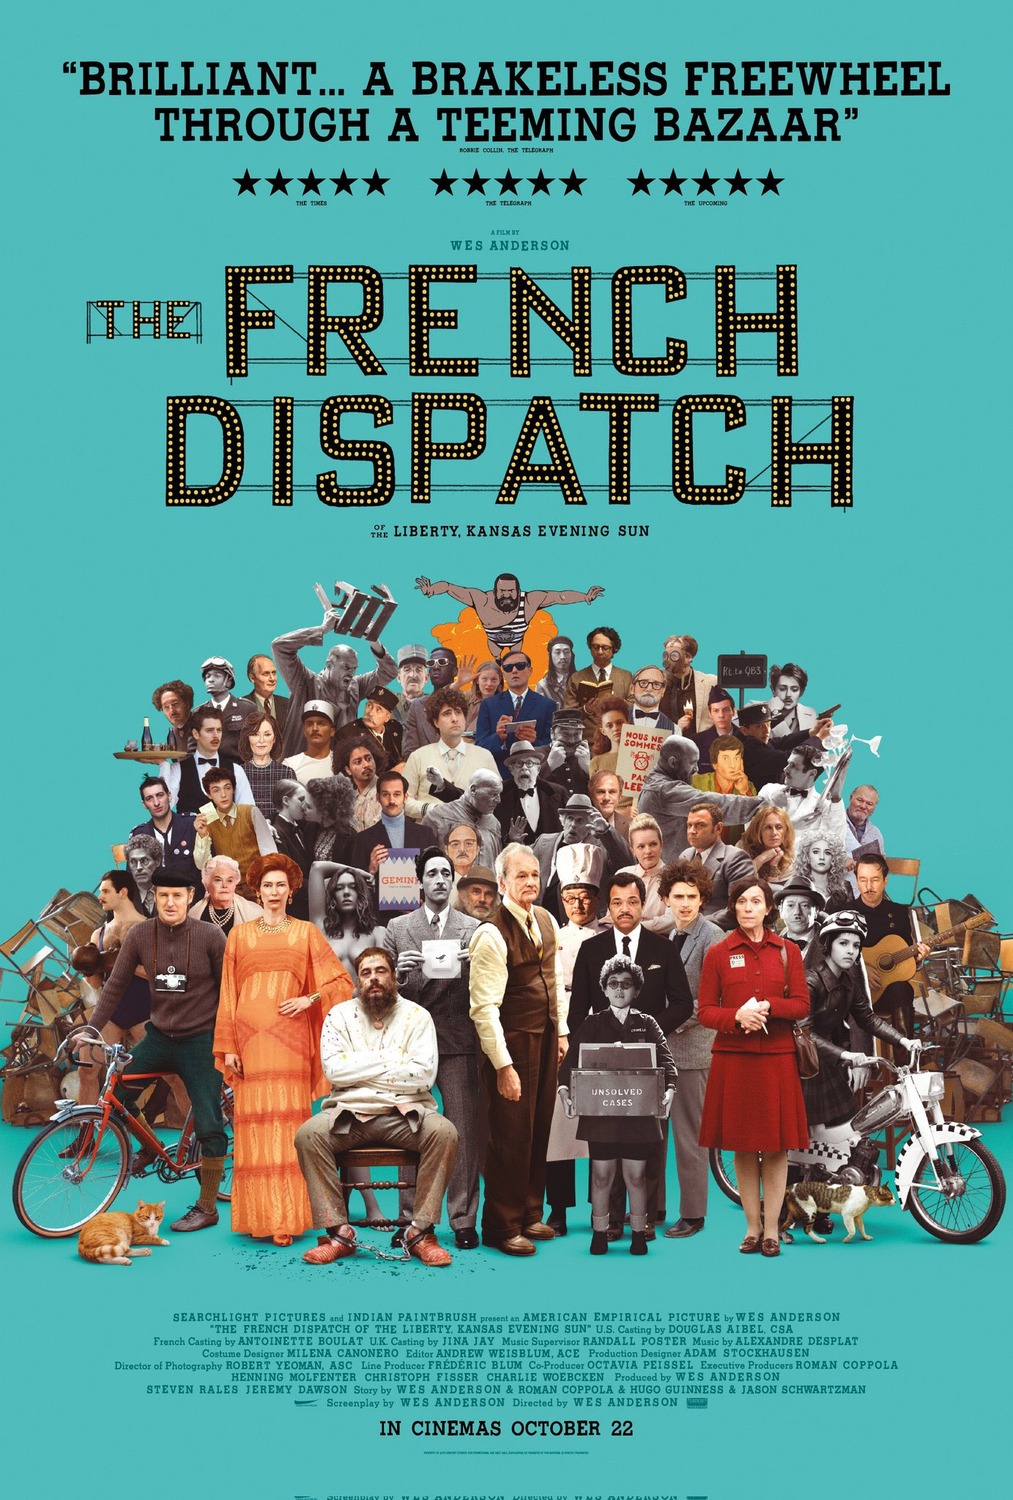 Poster for The French Dispatch (Photo courtesy of IMDb)